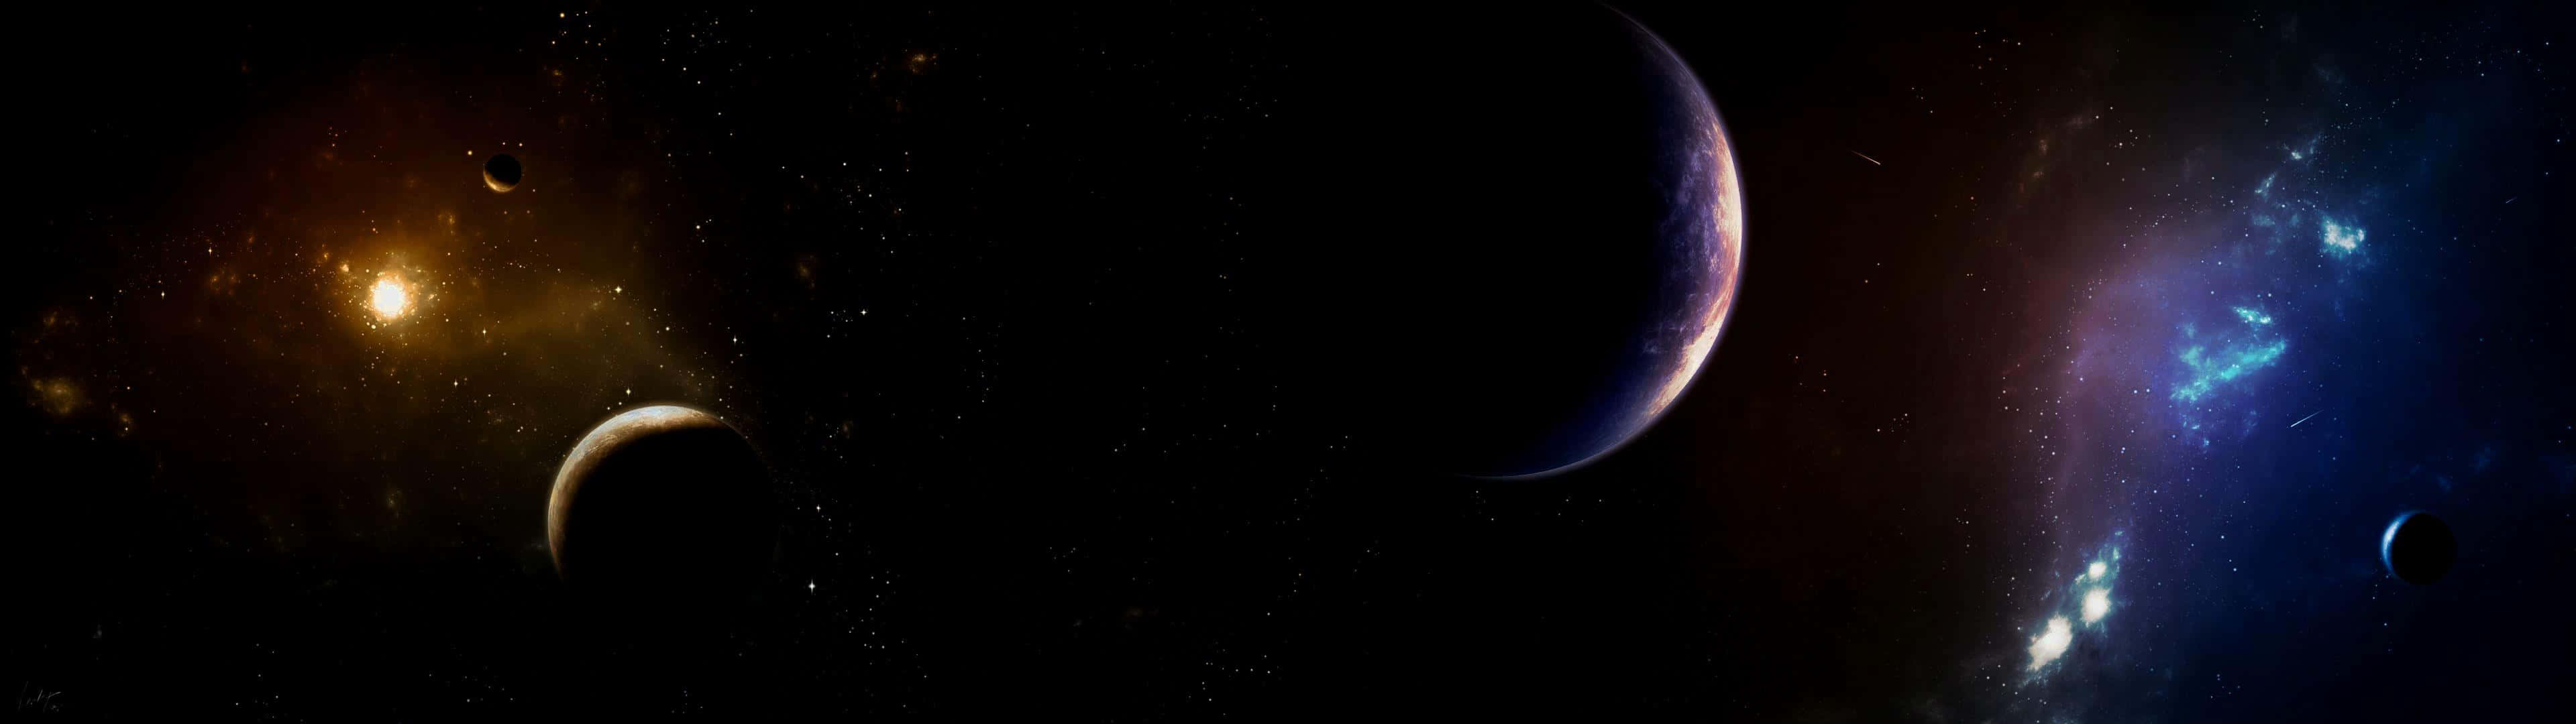 A Space Scene With Planets And Stars Wallpaper